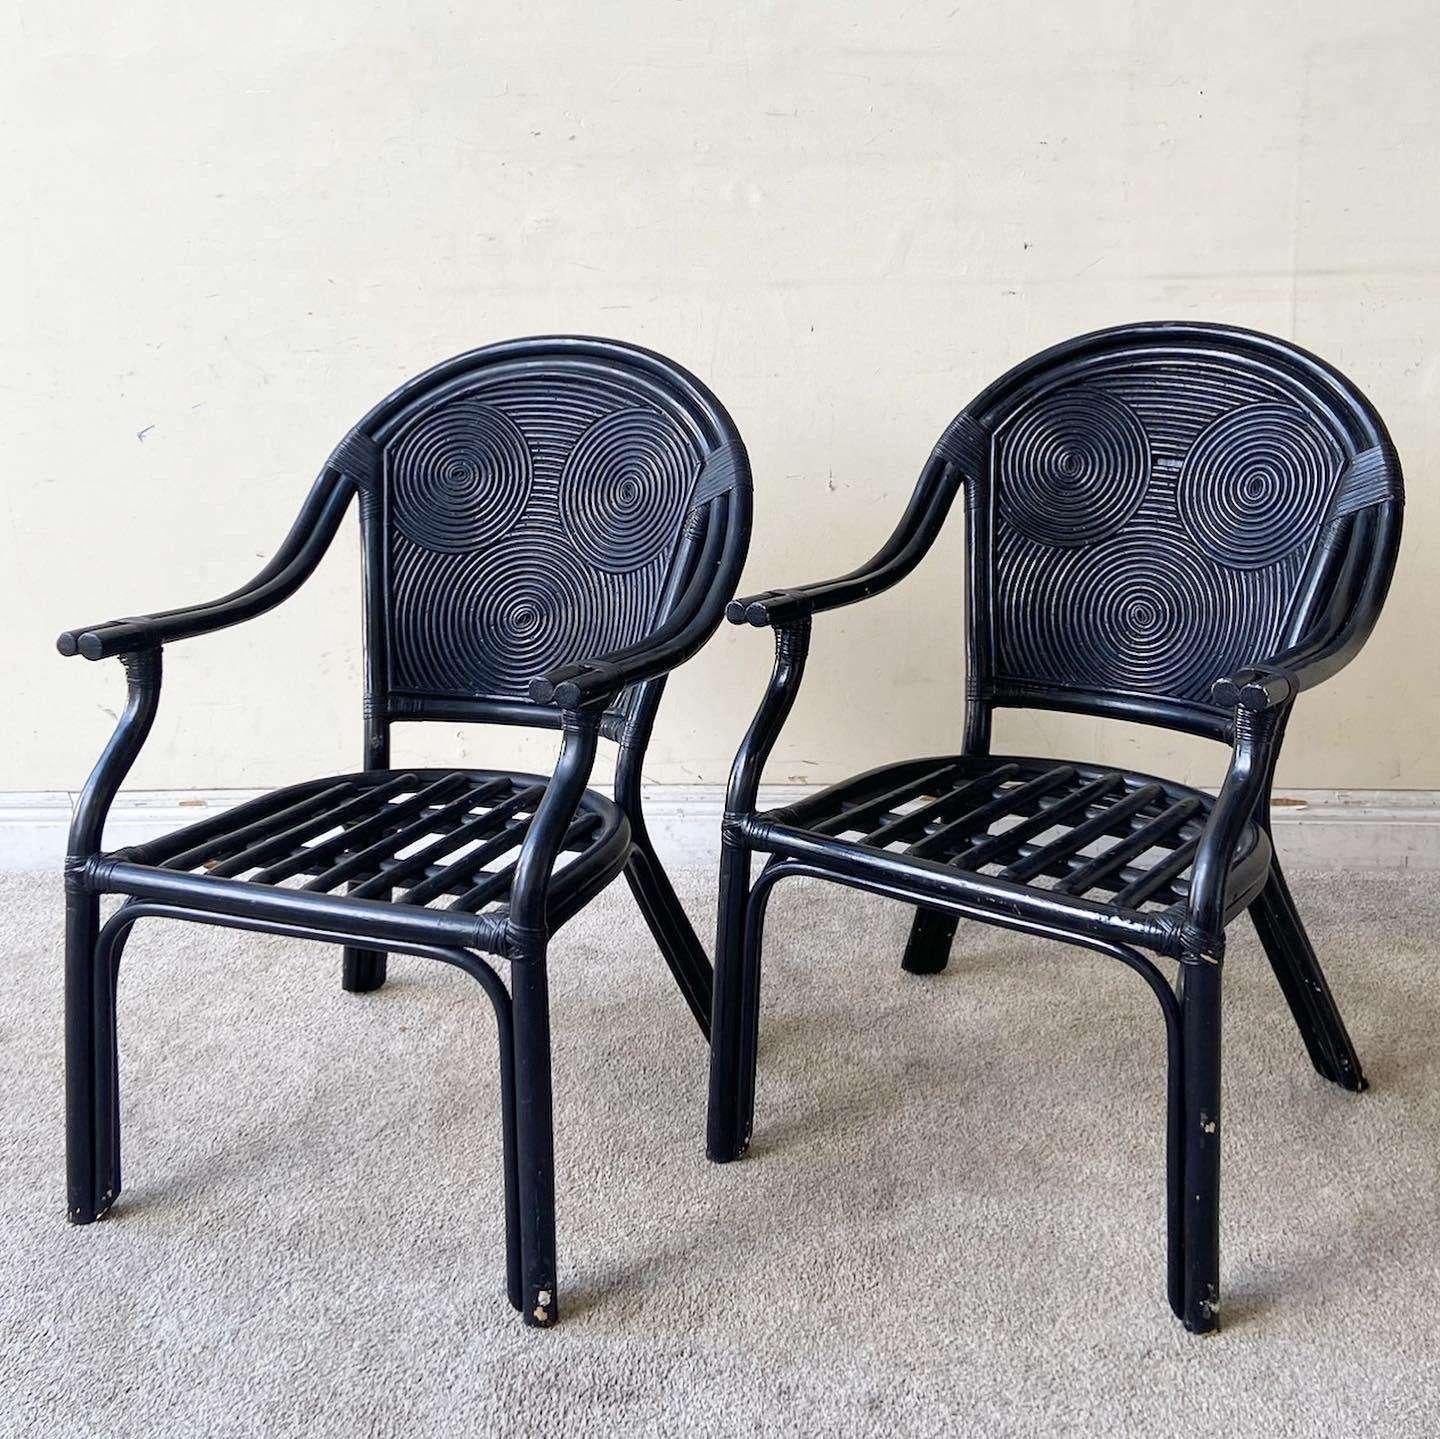 Bamboo Boho Chic Black Pencil Reed Arm Chairs - a Pair For Sale